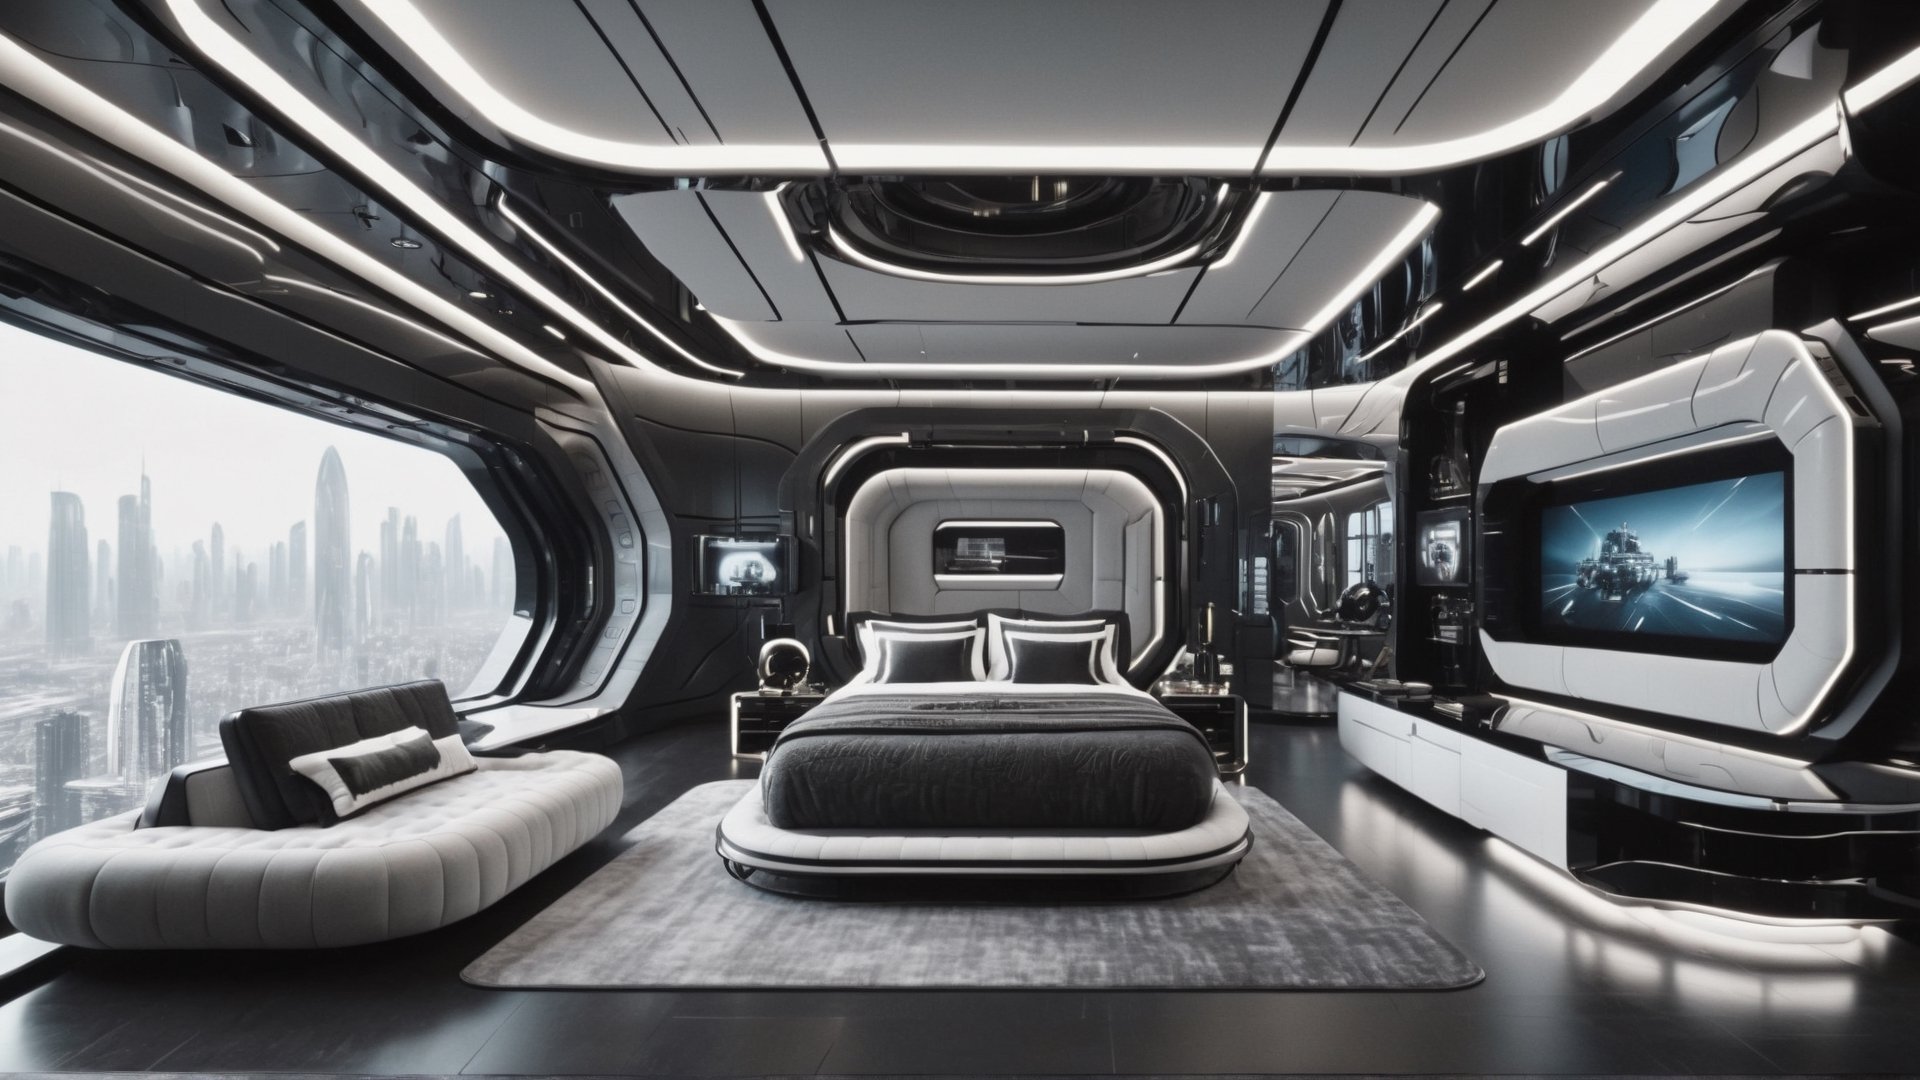 Masterpiece, ultra high definition, ultra high quality, 8k, exquisite details,
Space station, oversized floor-to-ceiling windows, future technology, intricate light, futuristic luxury furniture, cyberpunk, black and white gray tones, outer space background, planet, galaxy,